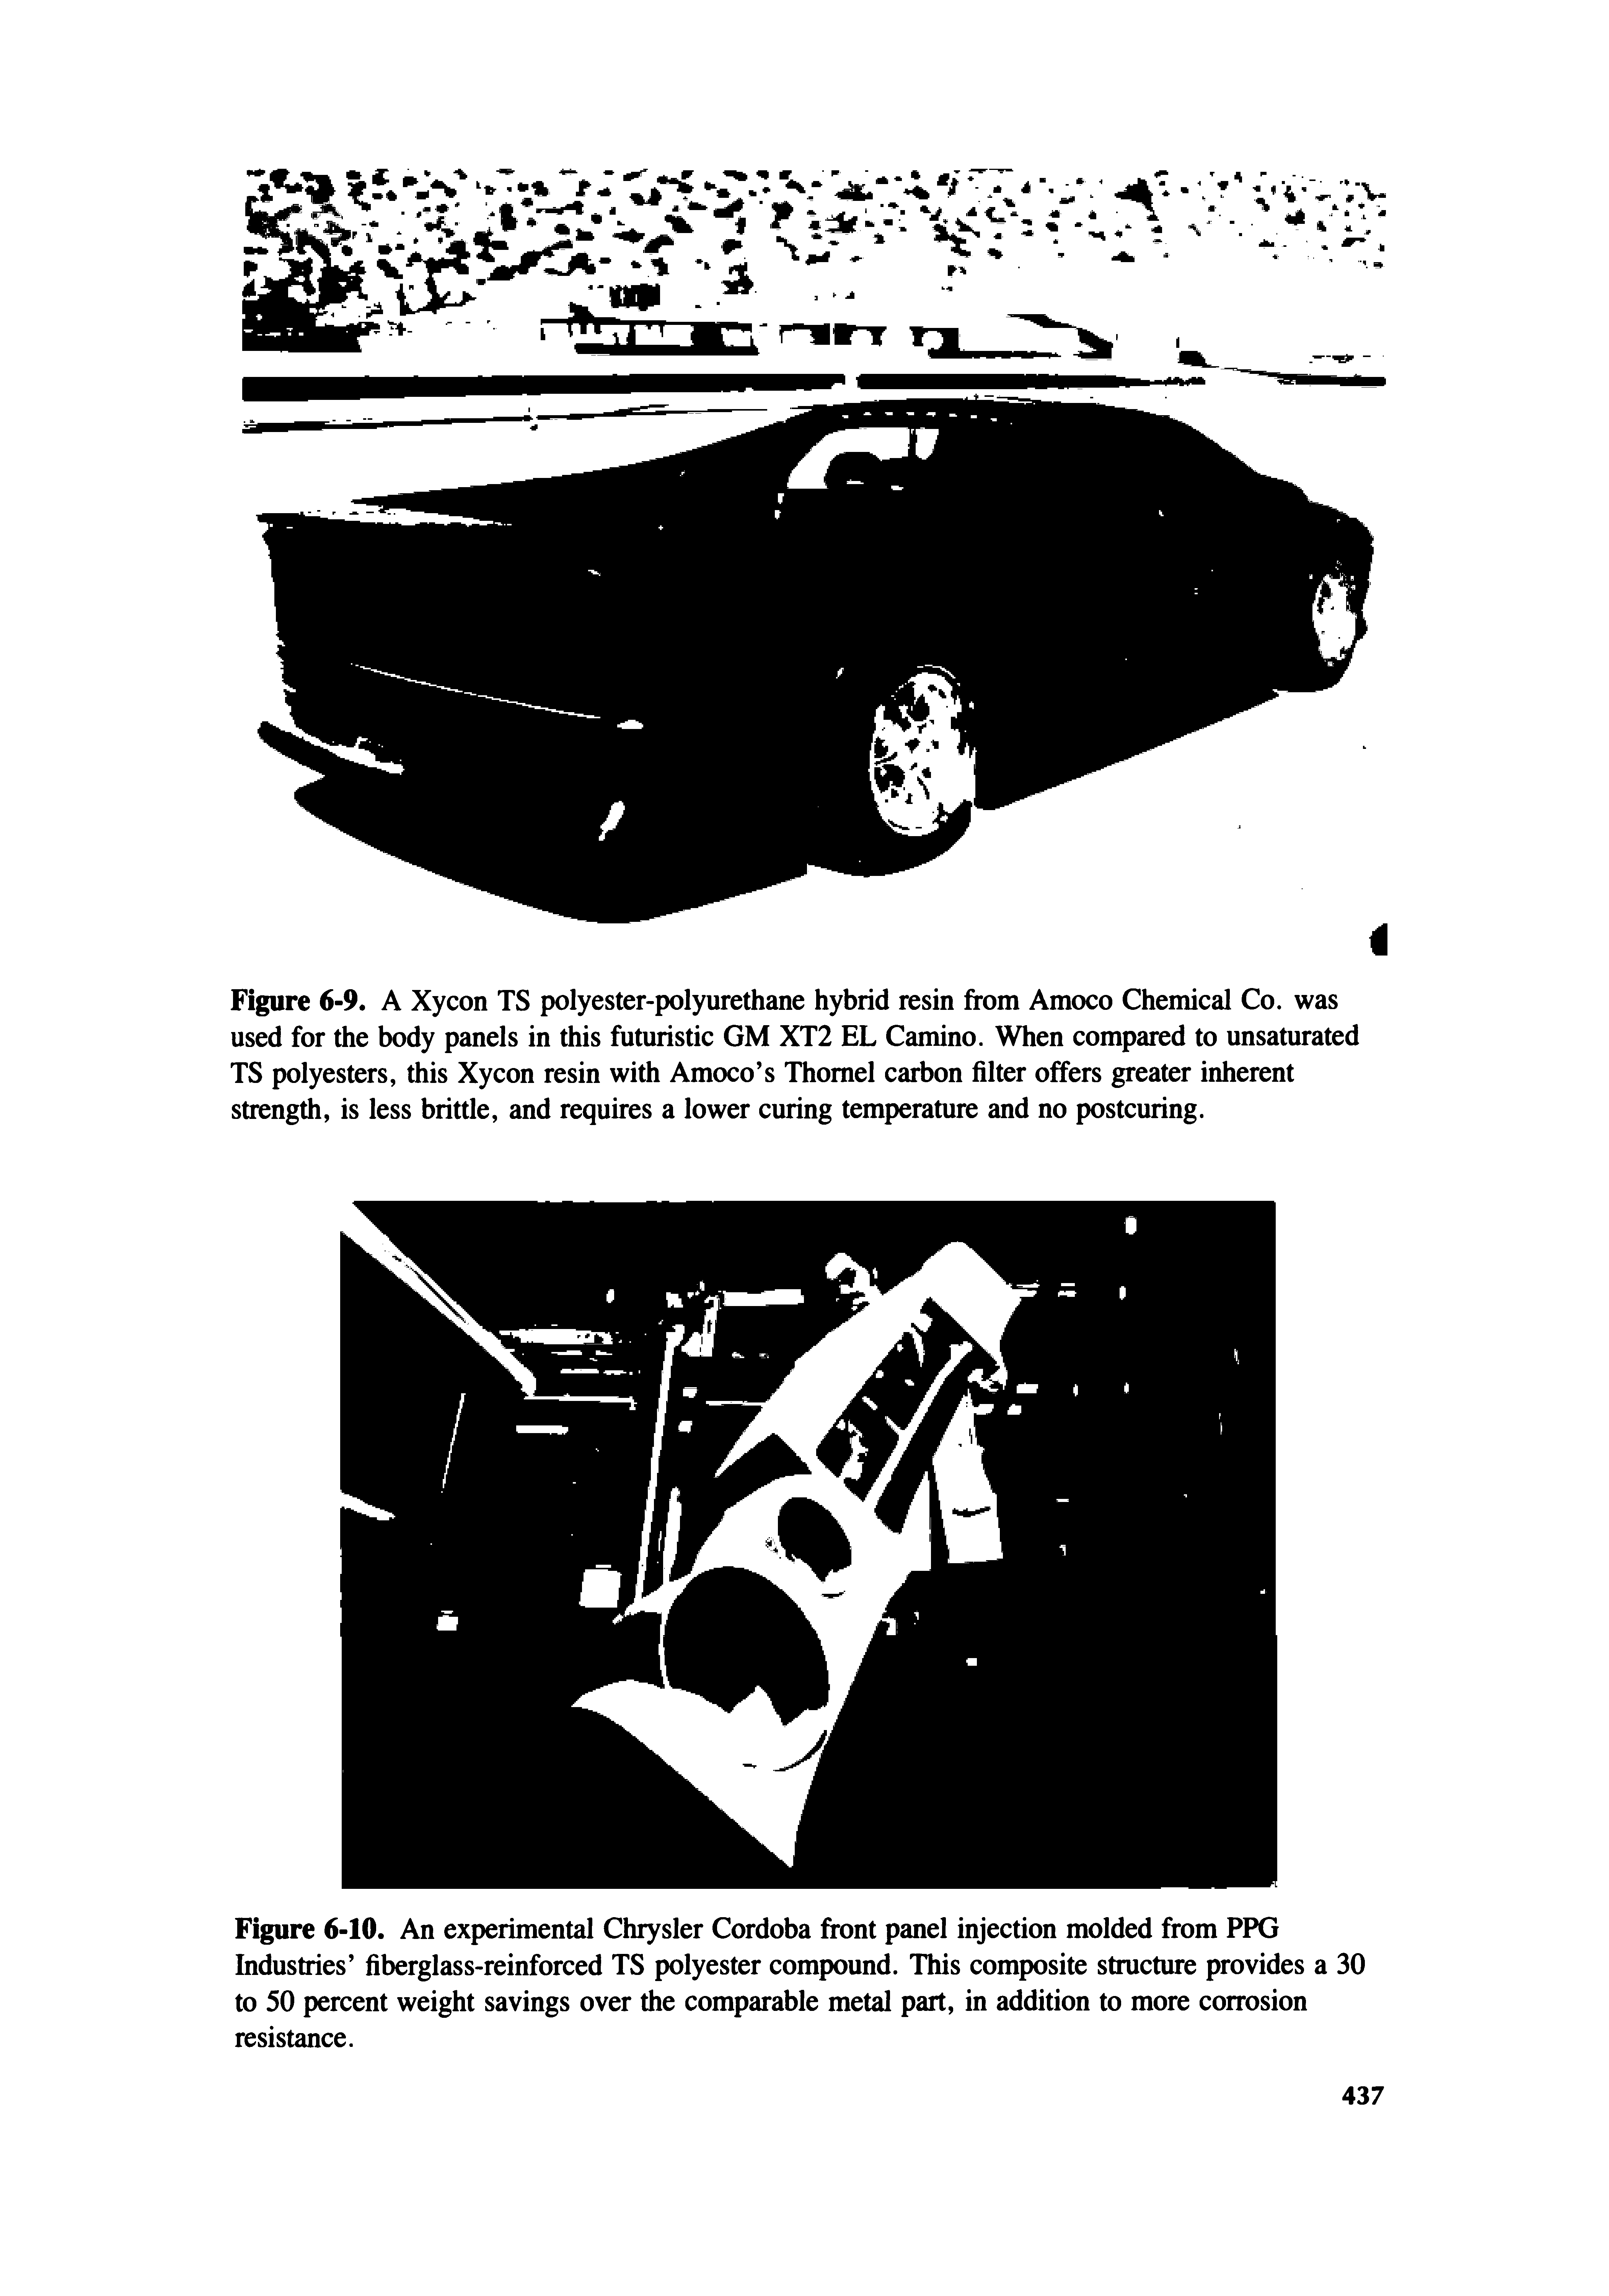 Figure 6-9. A Xycon TS polyester-polyurethane hybrid resin from Amoco Chemical Co. was used for the body panels in this futuristic GM XT2 EL Camino. When compared to unsaturated TS polyesters, this Xycon resin with Amoco s Thomel carbon filter offers greater inherent strength, is less brittle, and requires a lower curing temperature and no postcuring.